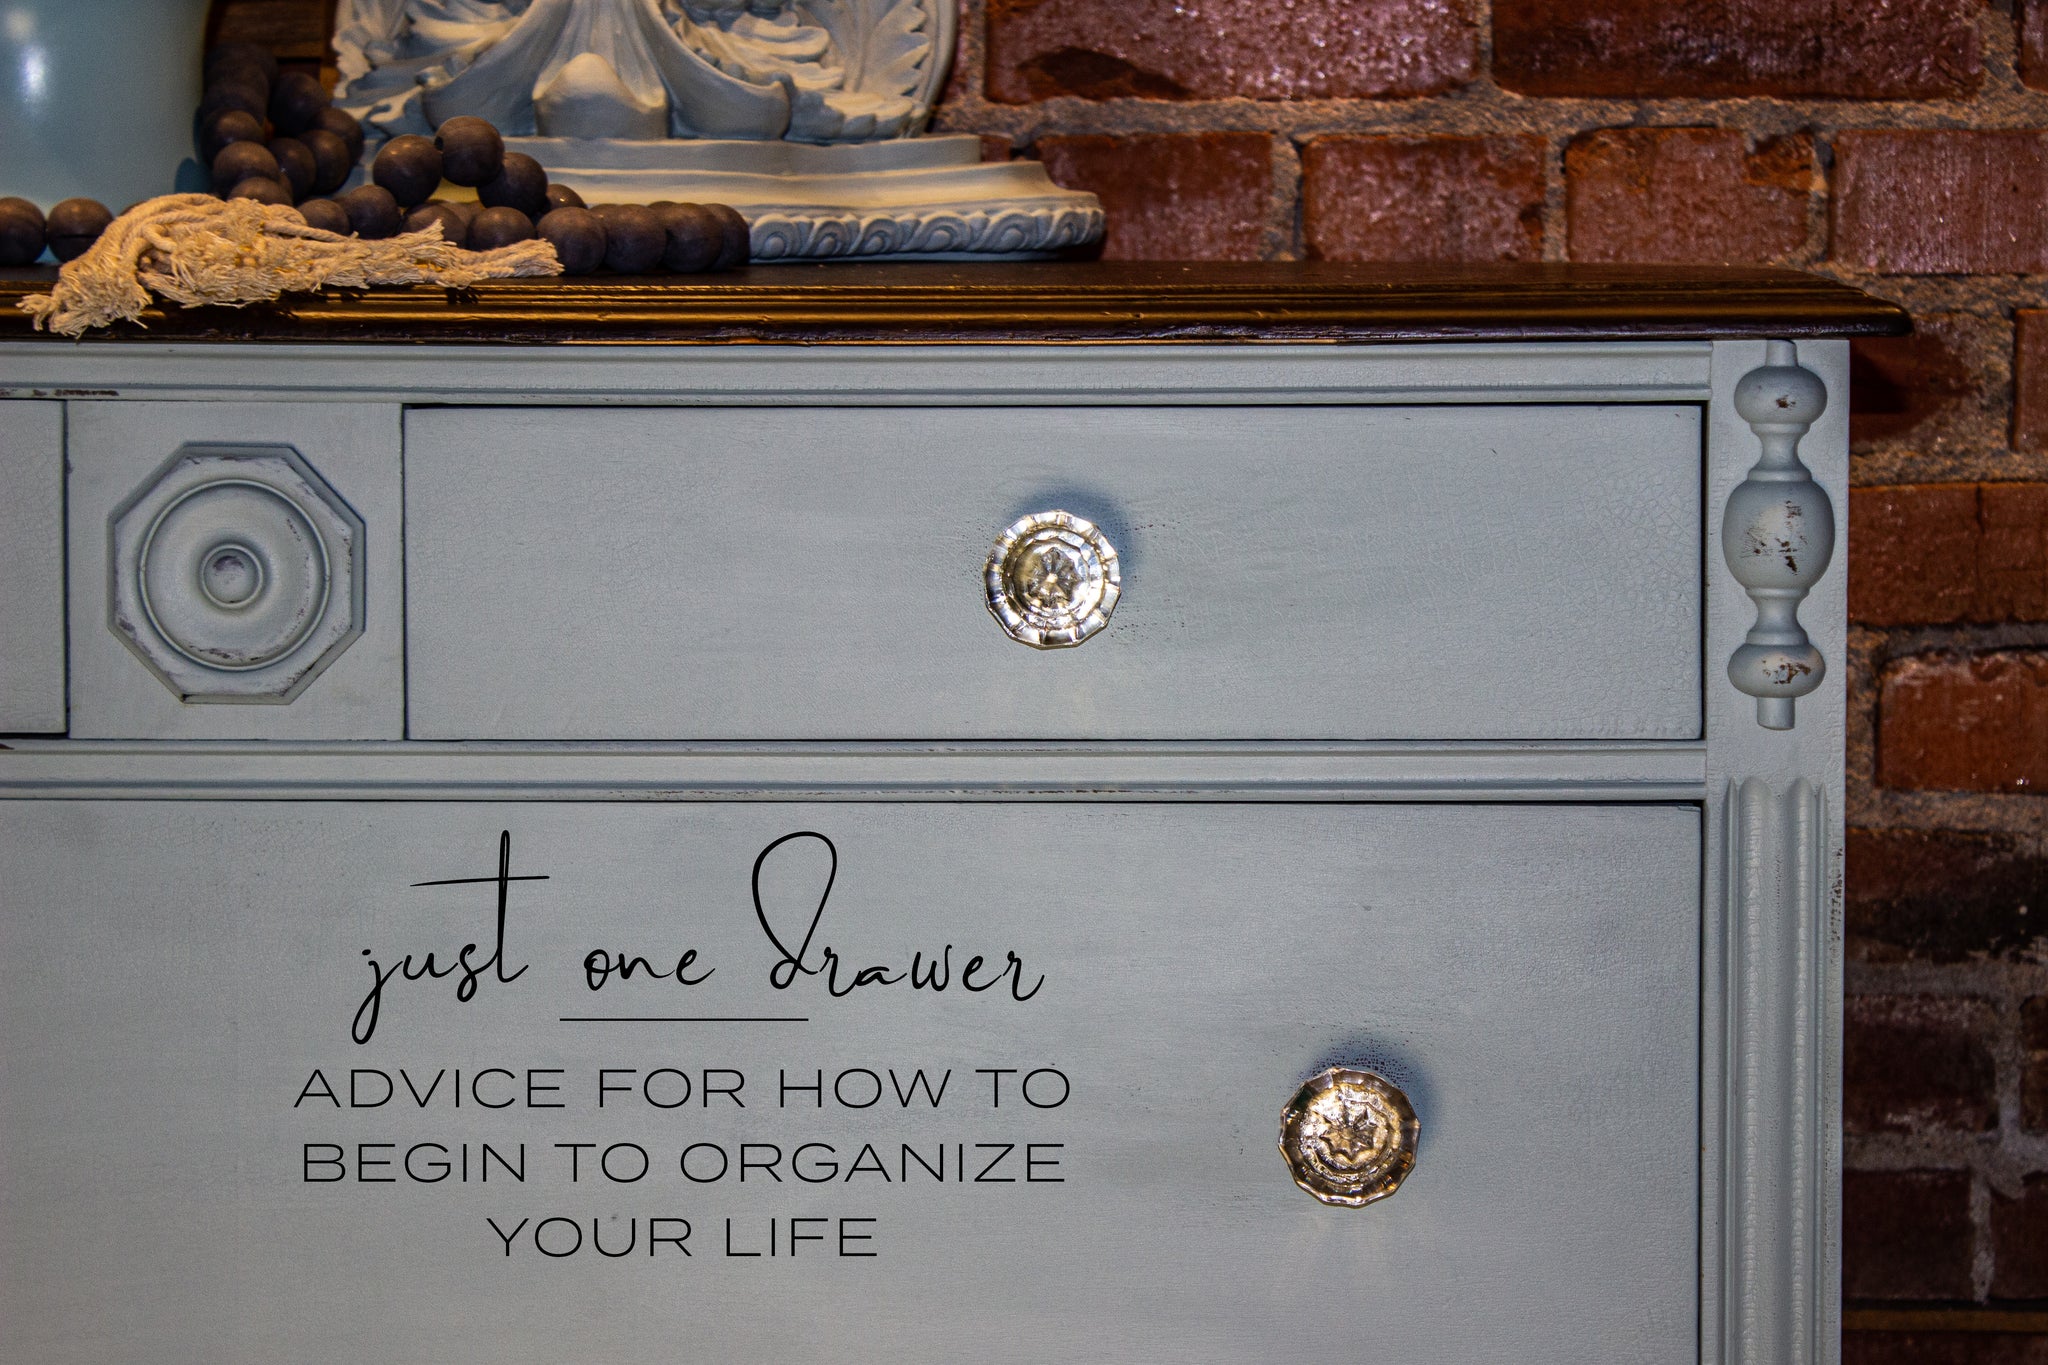 Just One Drawer: <p>Advice for how to begin to organize your life.</p>